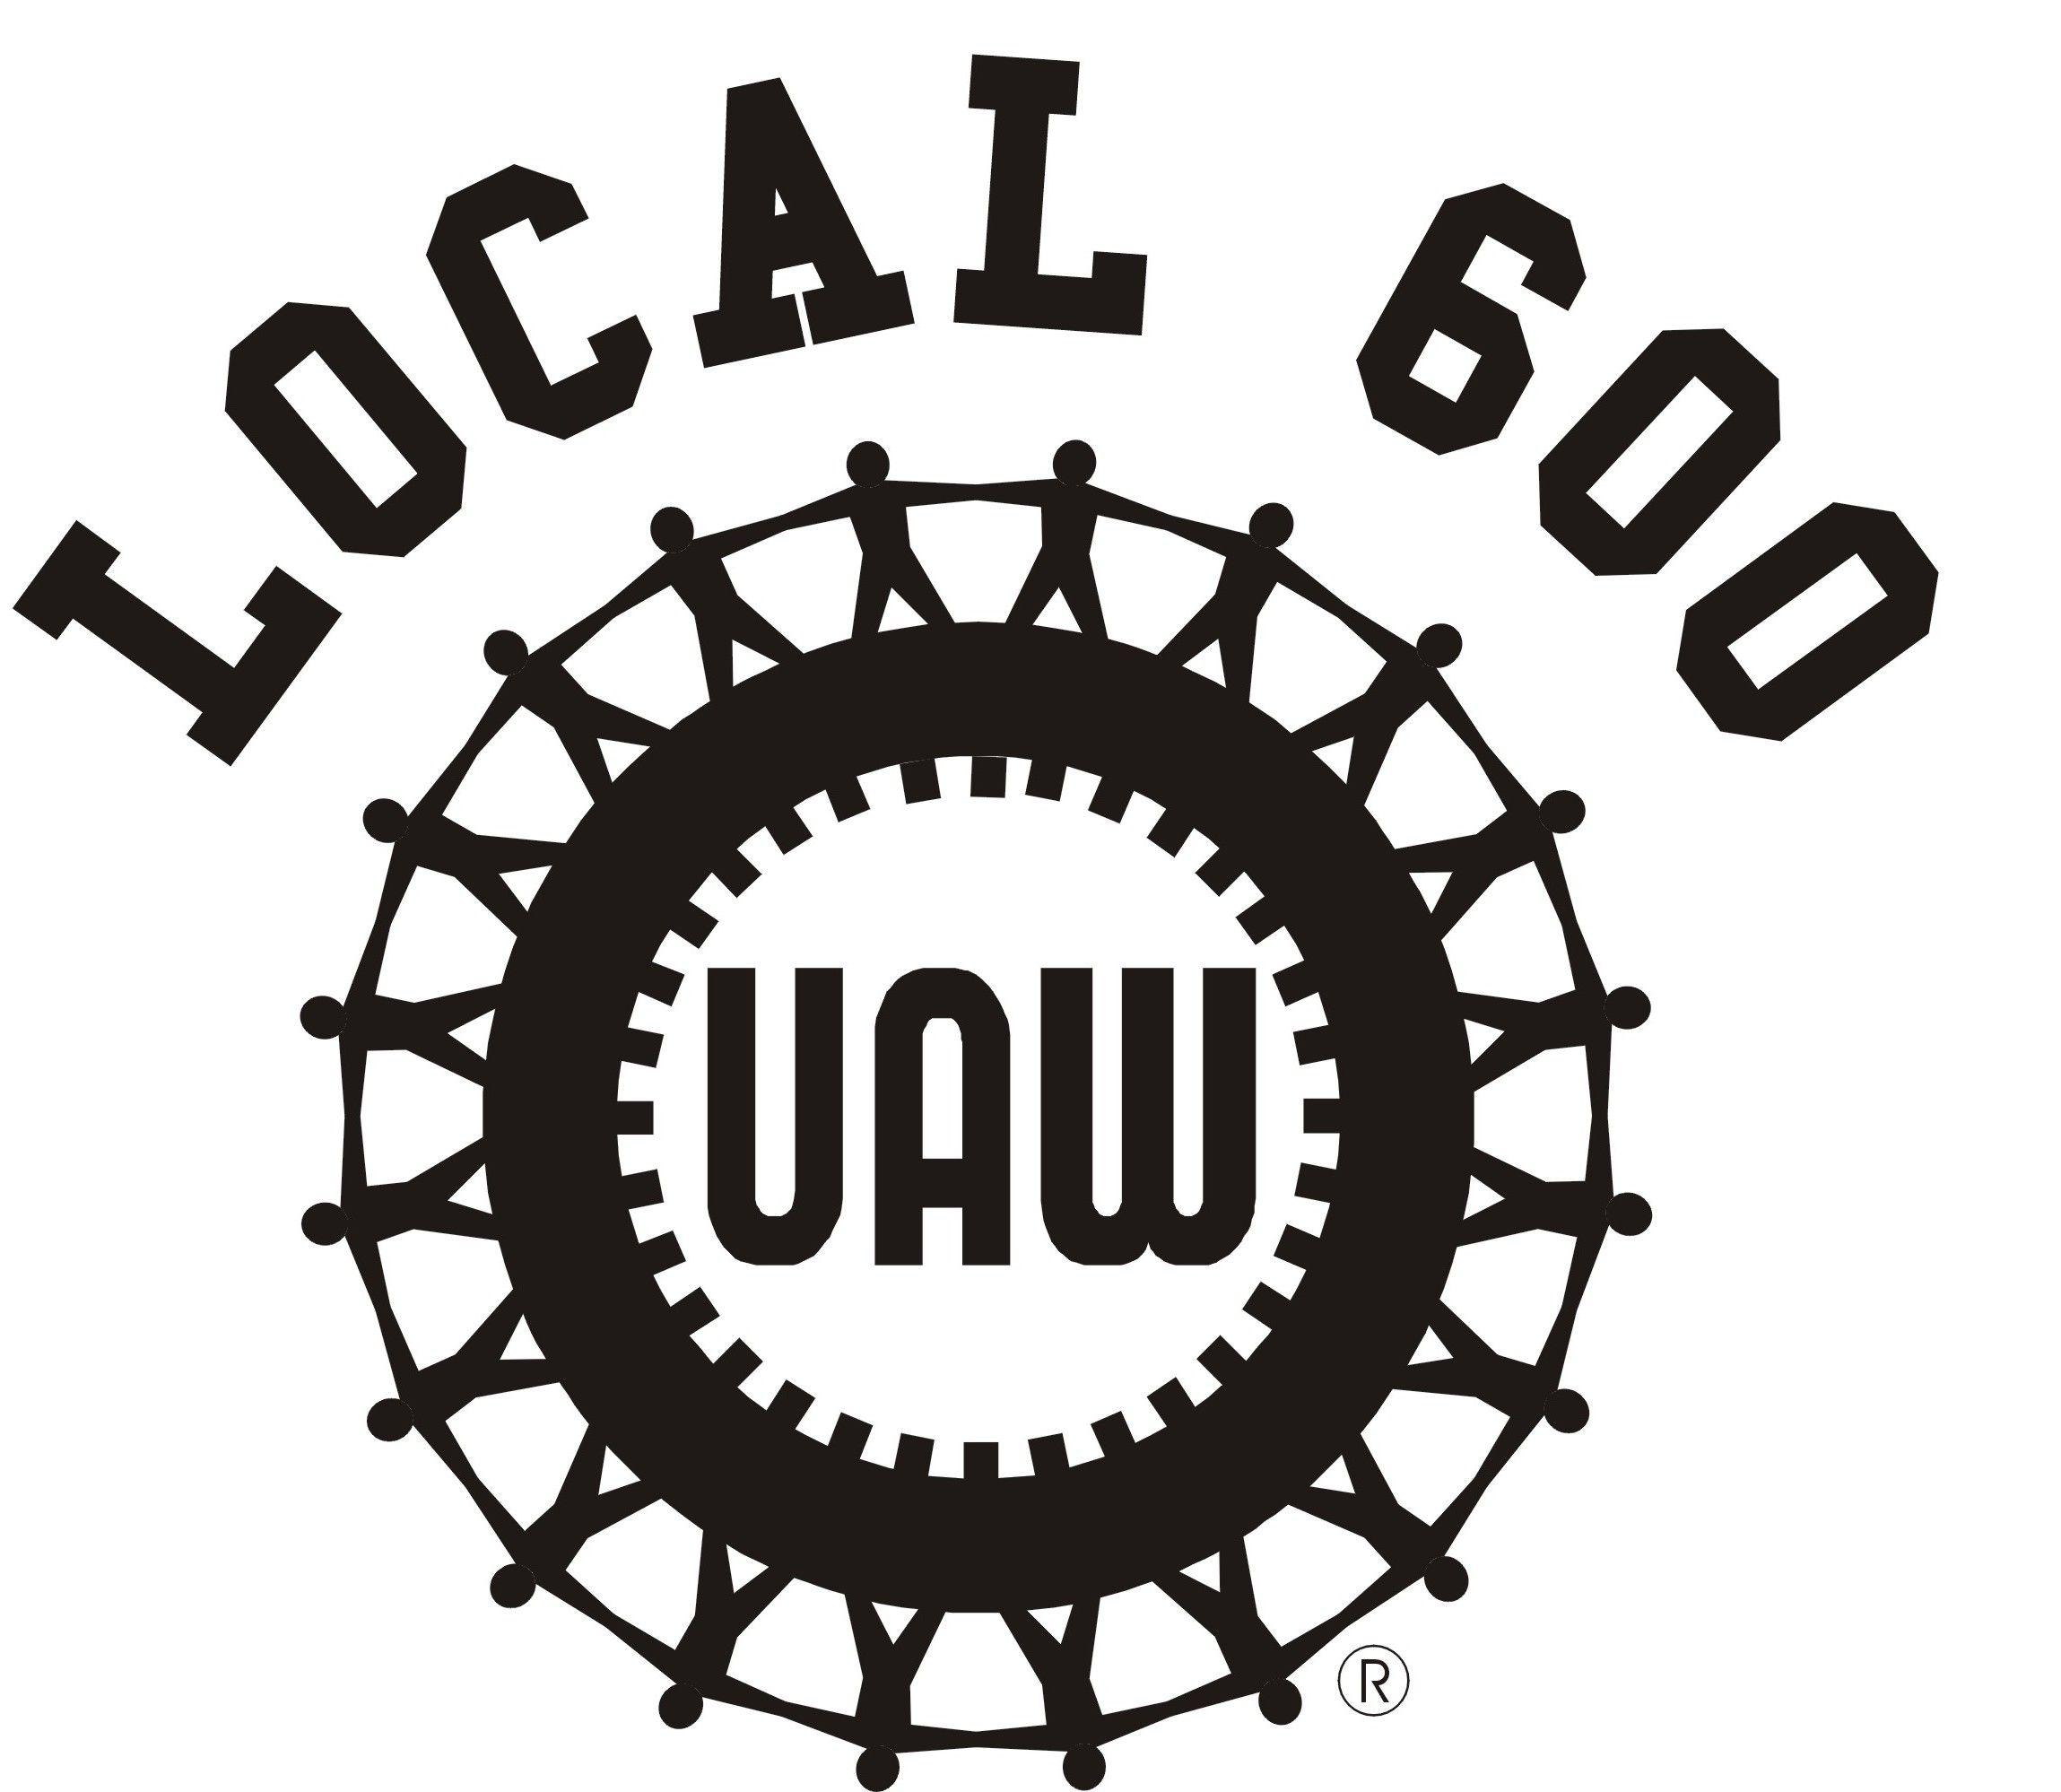 Local 600 UAW Logo - Pin by UAW Local 600 on UAW Local 600 | Pinterest